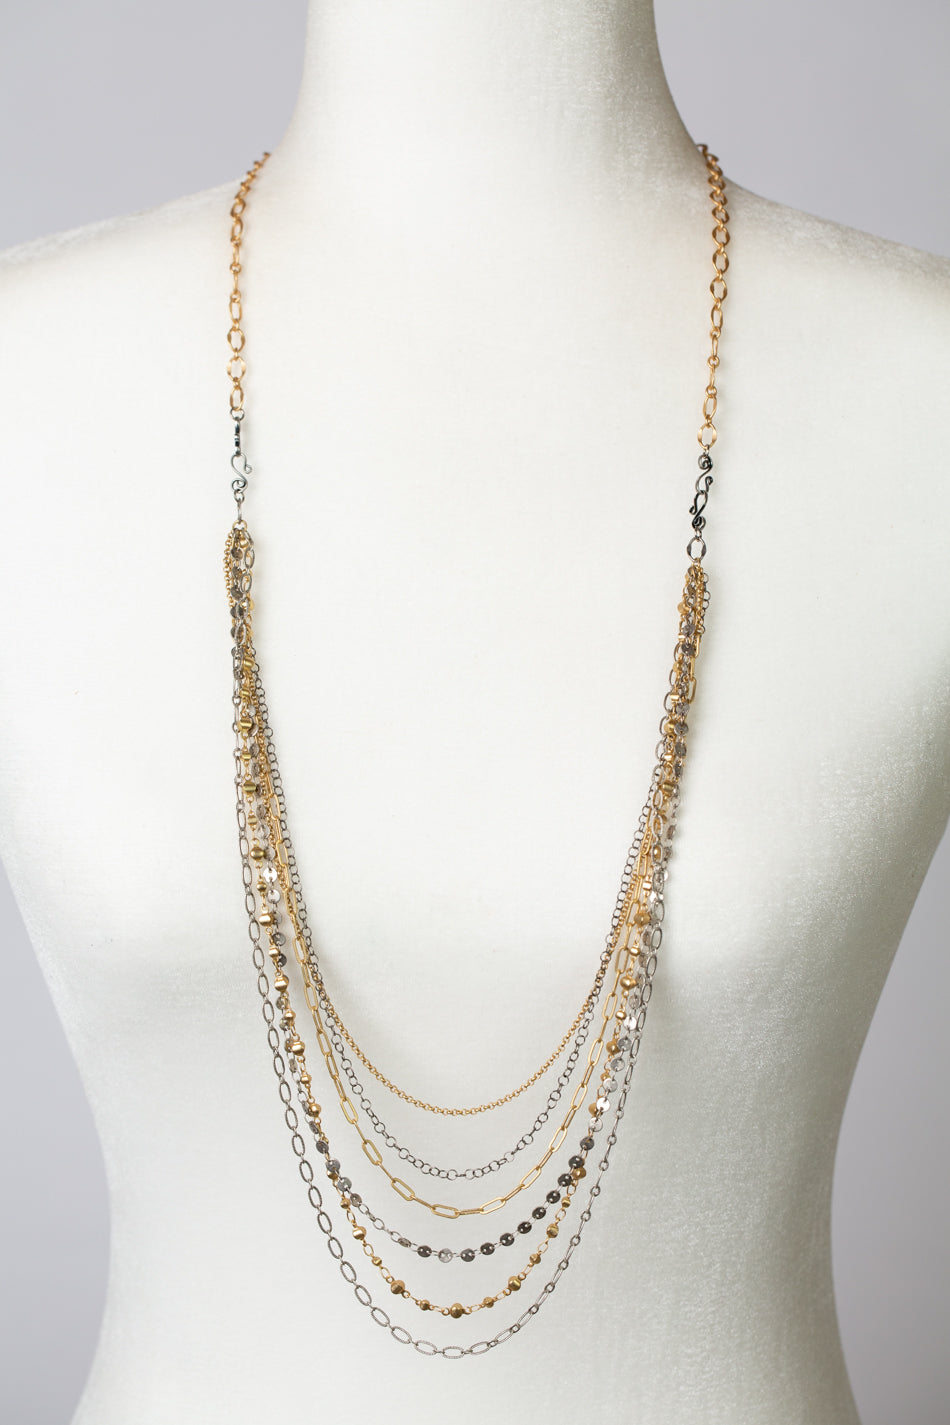 Silver & Gold 16.5 or 33.25" Multistrand Necklace